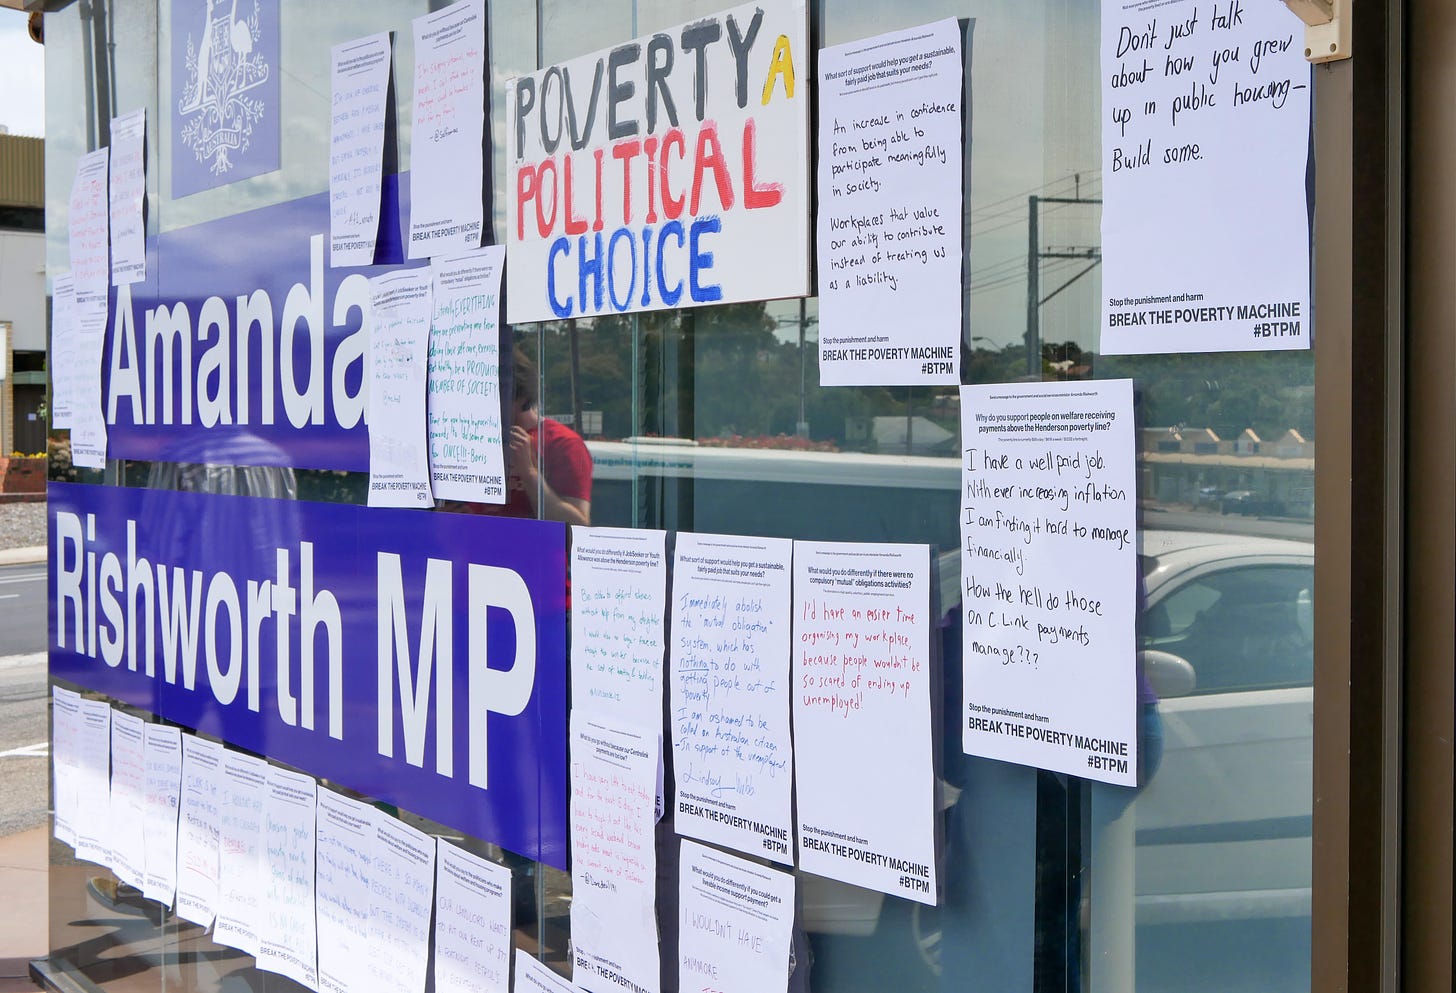 Photograph of a glass fronted office with large white lettering on a blue background that says "Amanda Rishworth MP". Posters and protests signs have been stuck to the glass. 